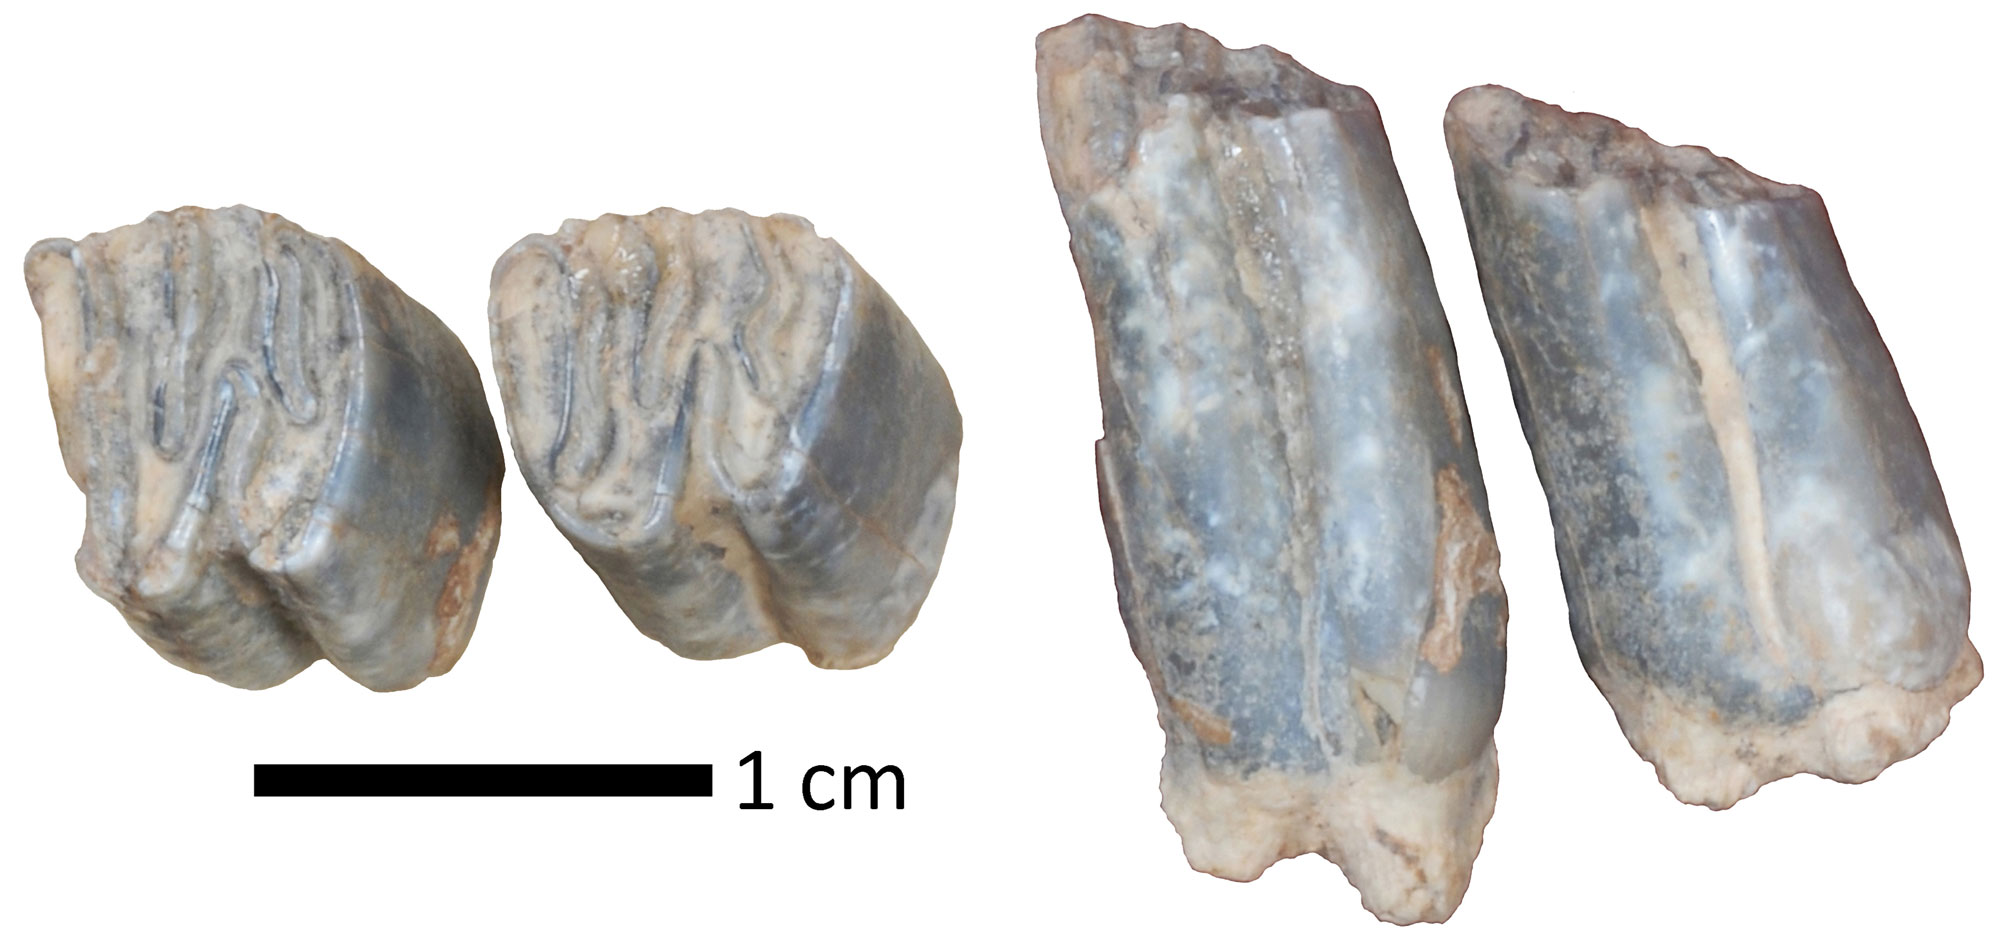 Photographs of beaver teeth from the Rattlesnake Formation. The image shows the chewing surfaces and side views of two teeth. Each tooth is nearly square when viewed from above, with low cusps. When viewed from the sides, the teeth are rectangular.